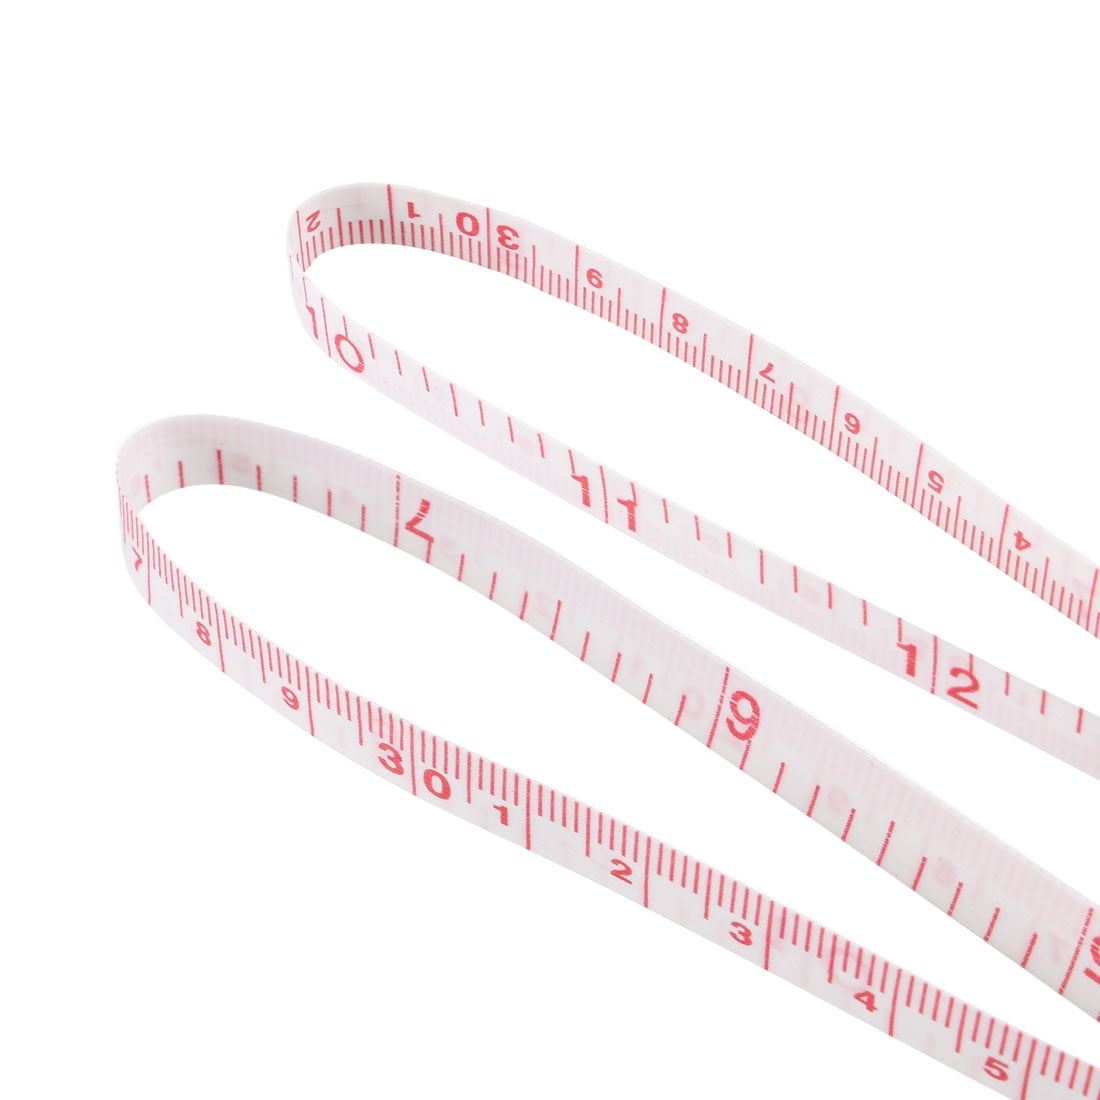 60Metric Soft Plastic Tape Measure Sewing Tailor Cloth Ruler 10Pcs -  White,Red - Bed Bath & Beyond - 24089367